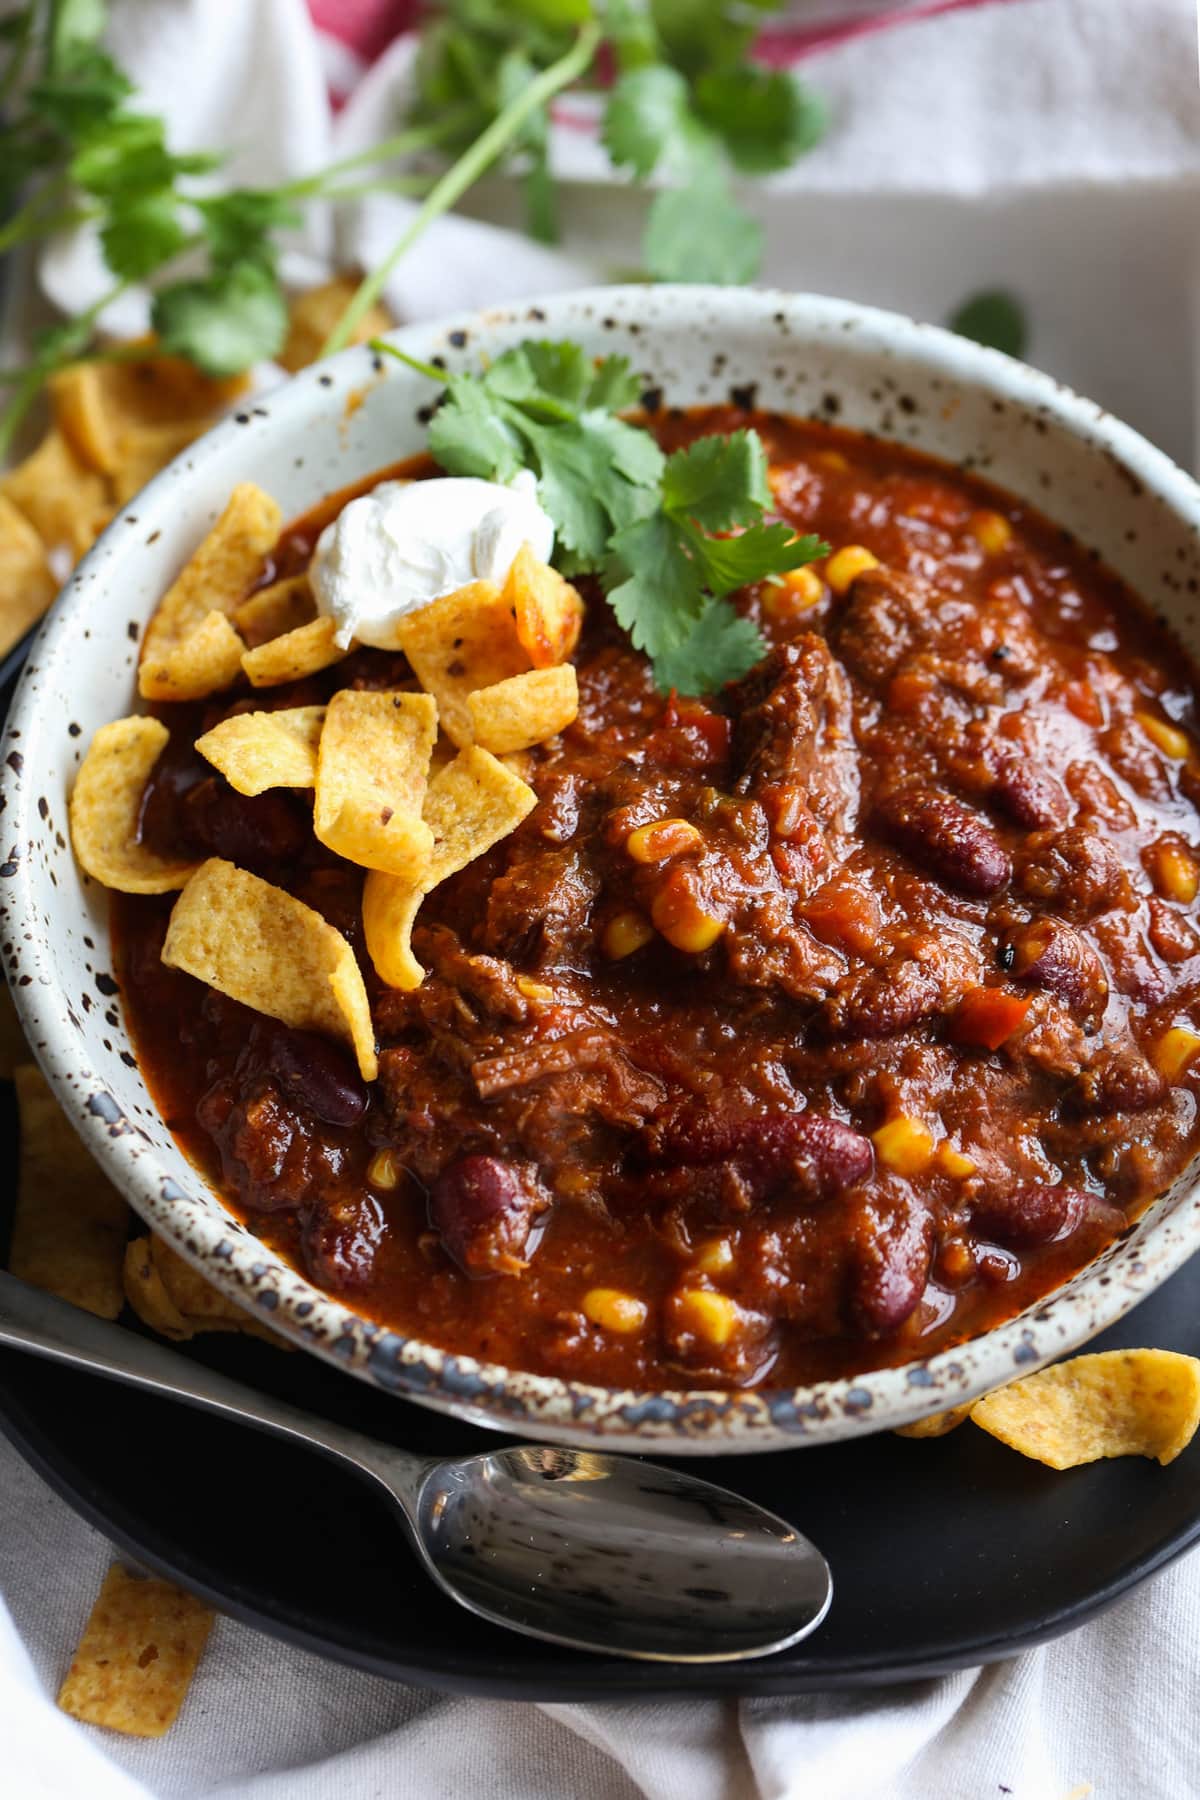 Chili topped with corn chips and basil